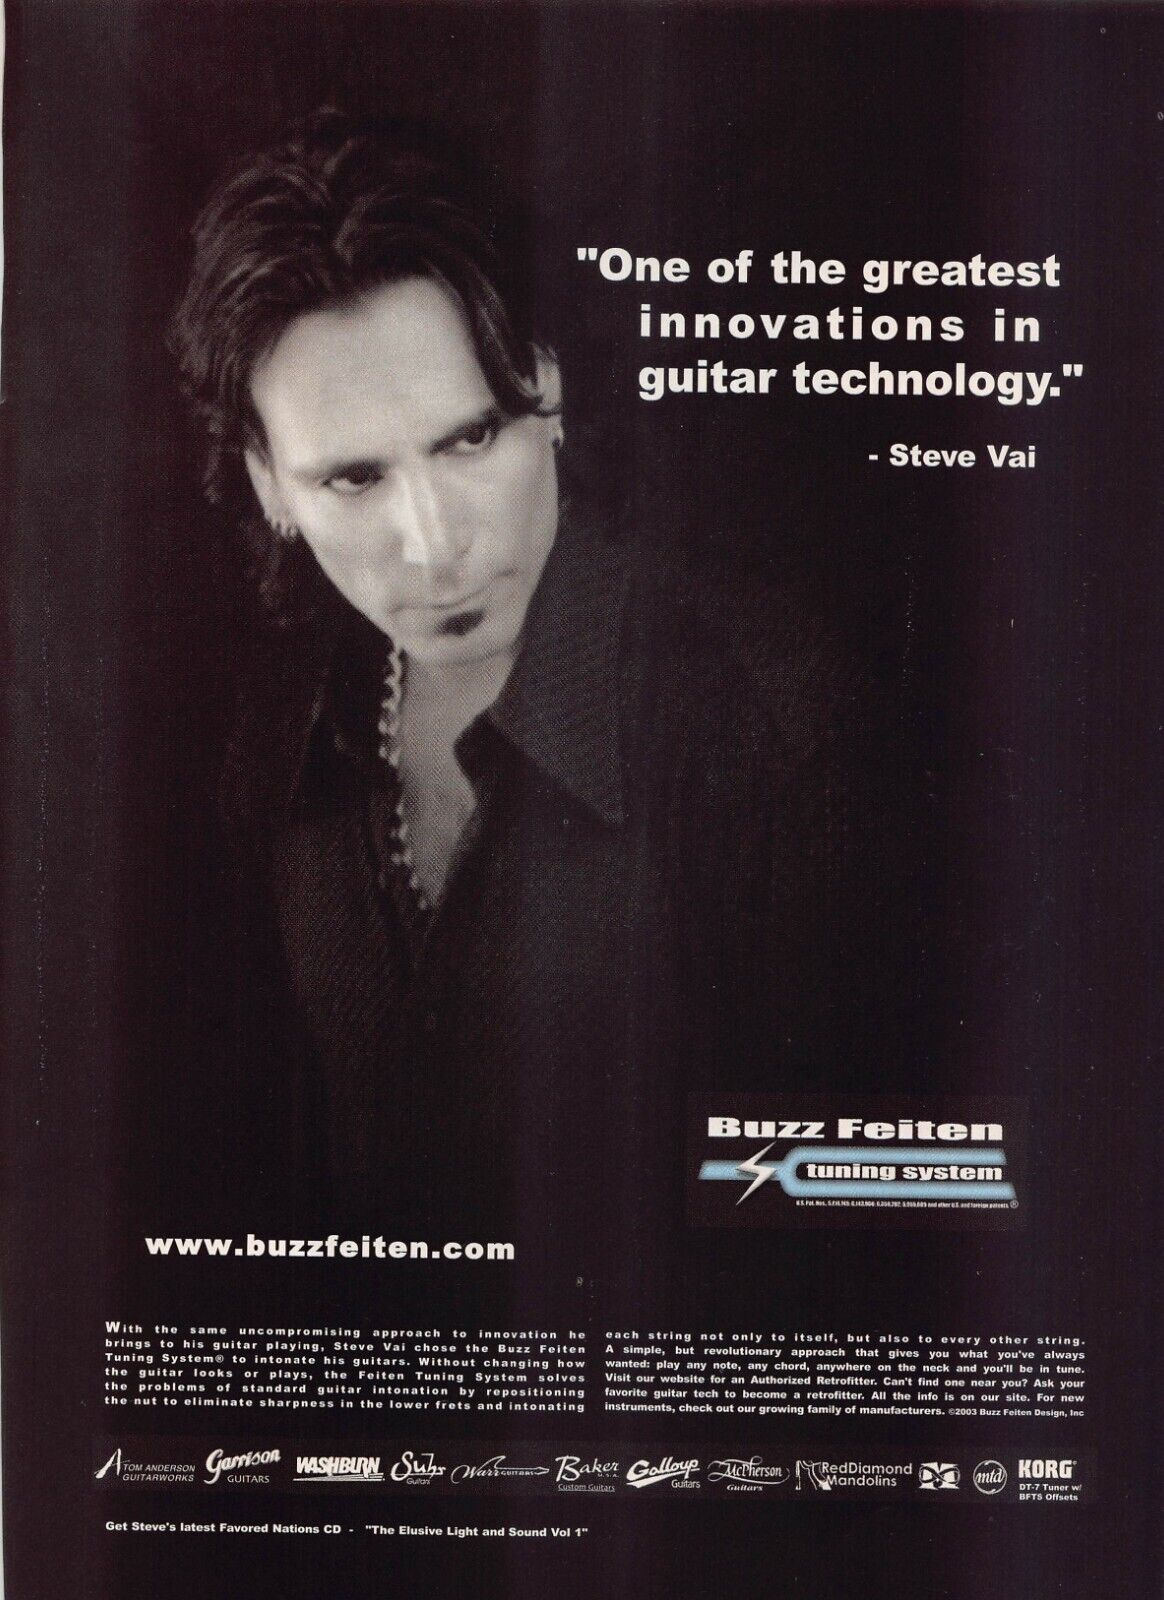 Buzz Feiten Tuning System Print Ad Steve Vai Endorsed Uncompromising Approach